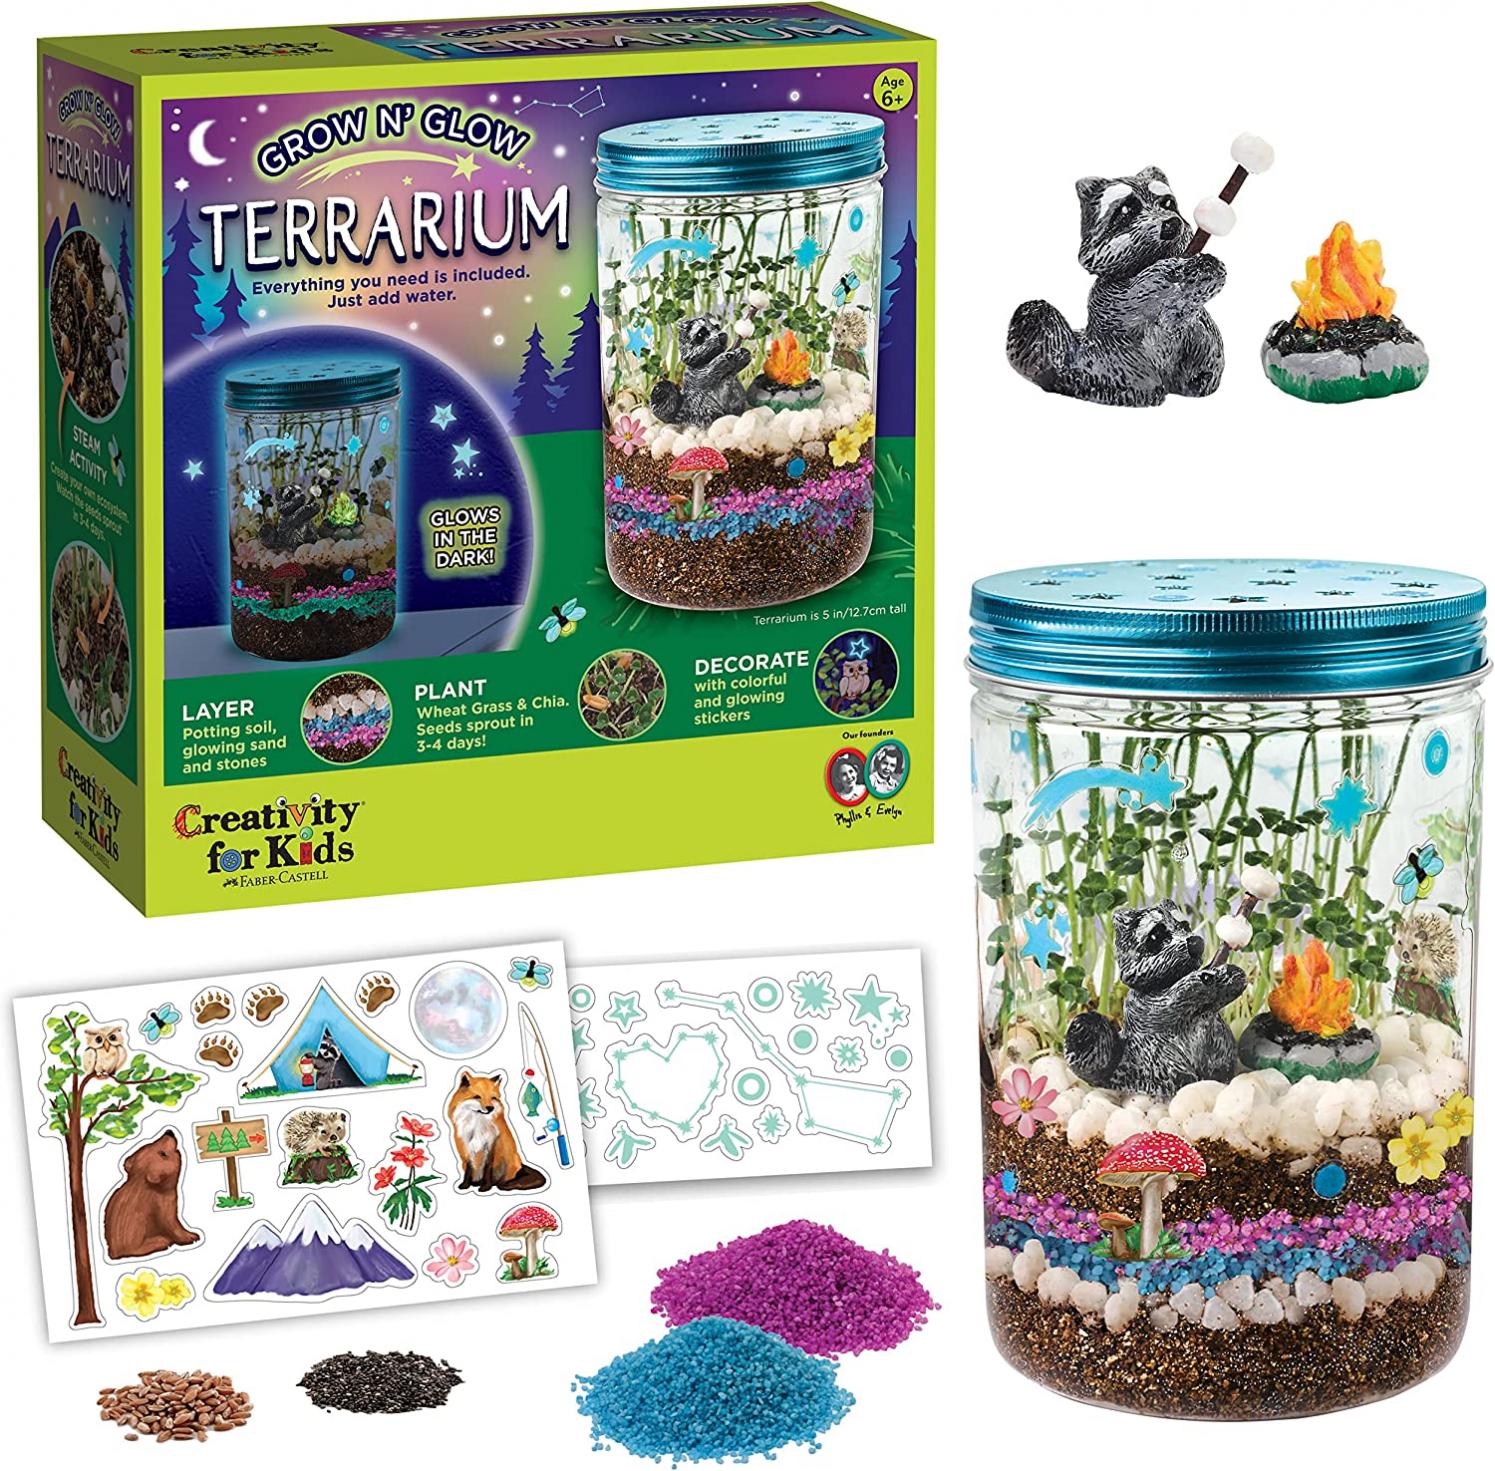 Creativity for Kids Grow 'N Glow Terrarium Kit for Kids - Science Activities for Kids Ages 5-8+, Kids Craft Kits and Creative Gifts for Kids